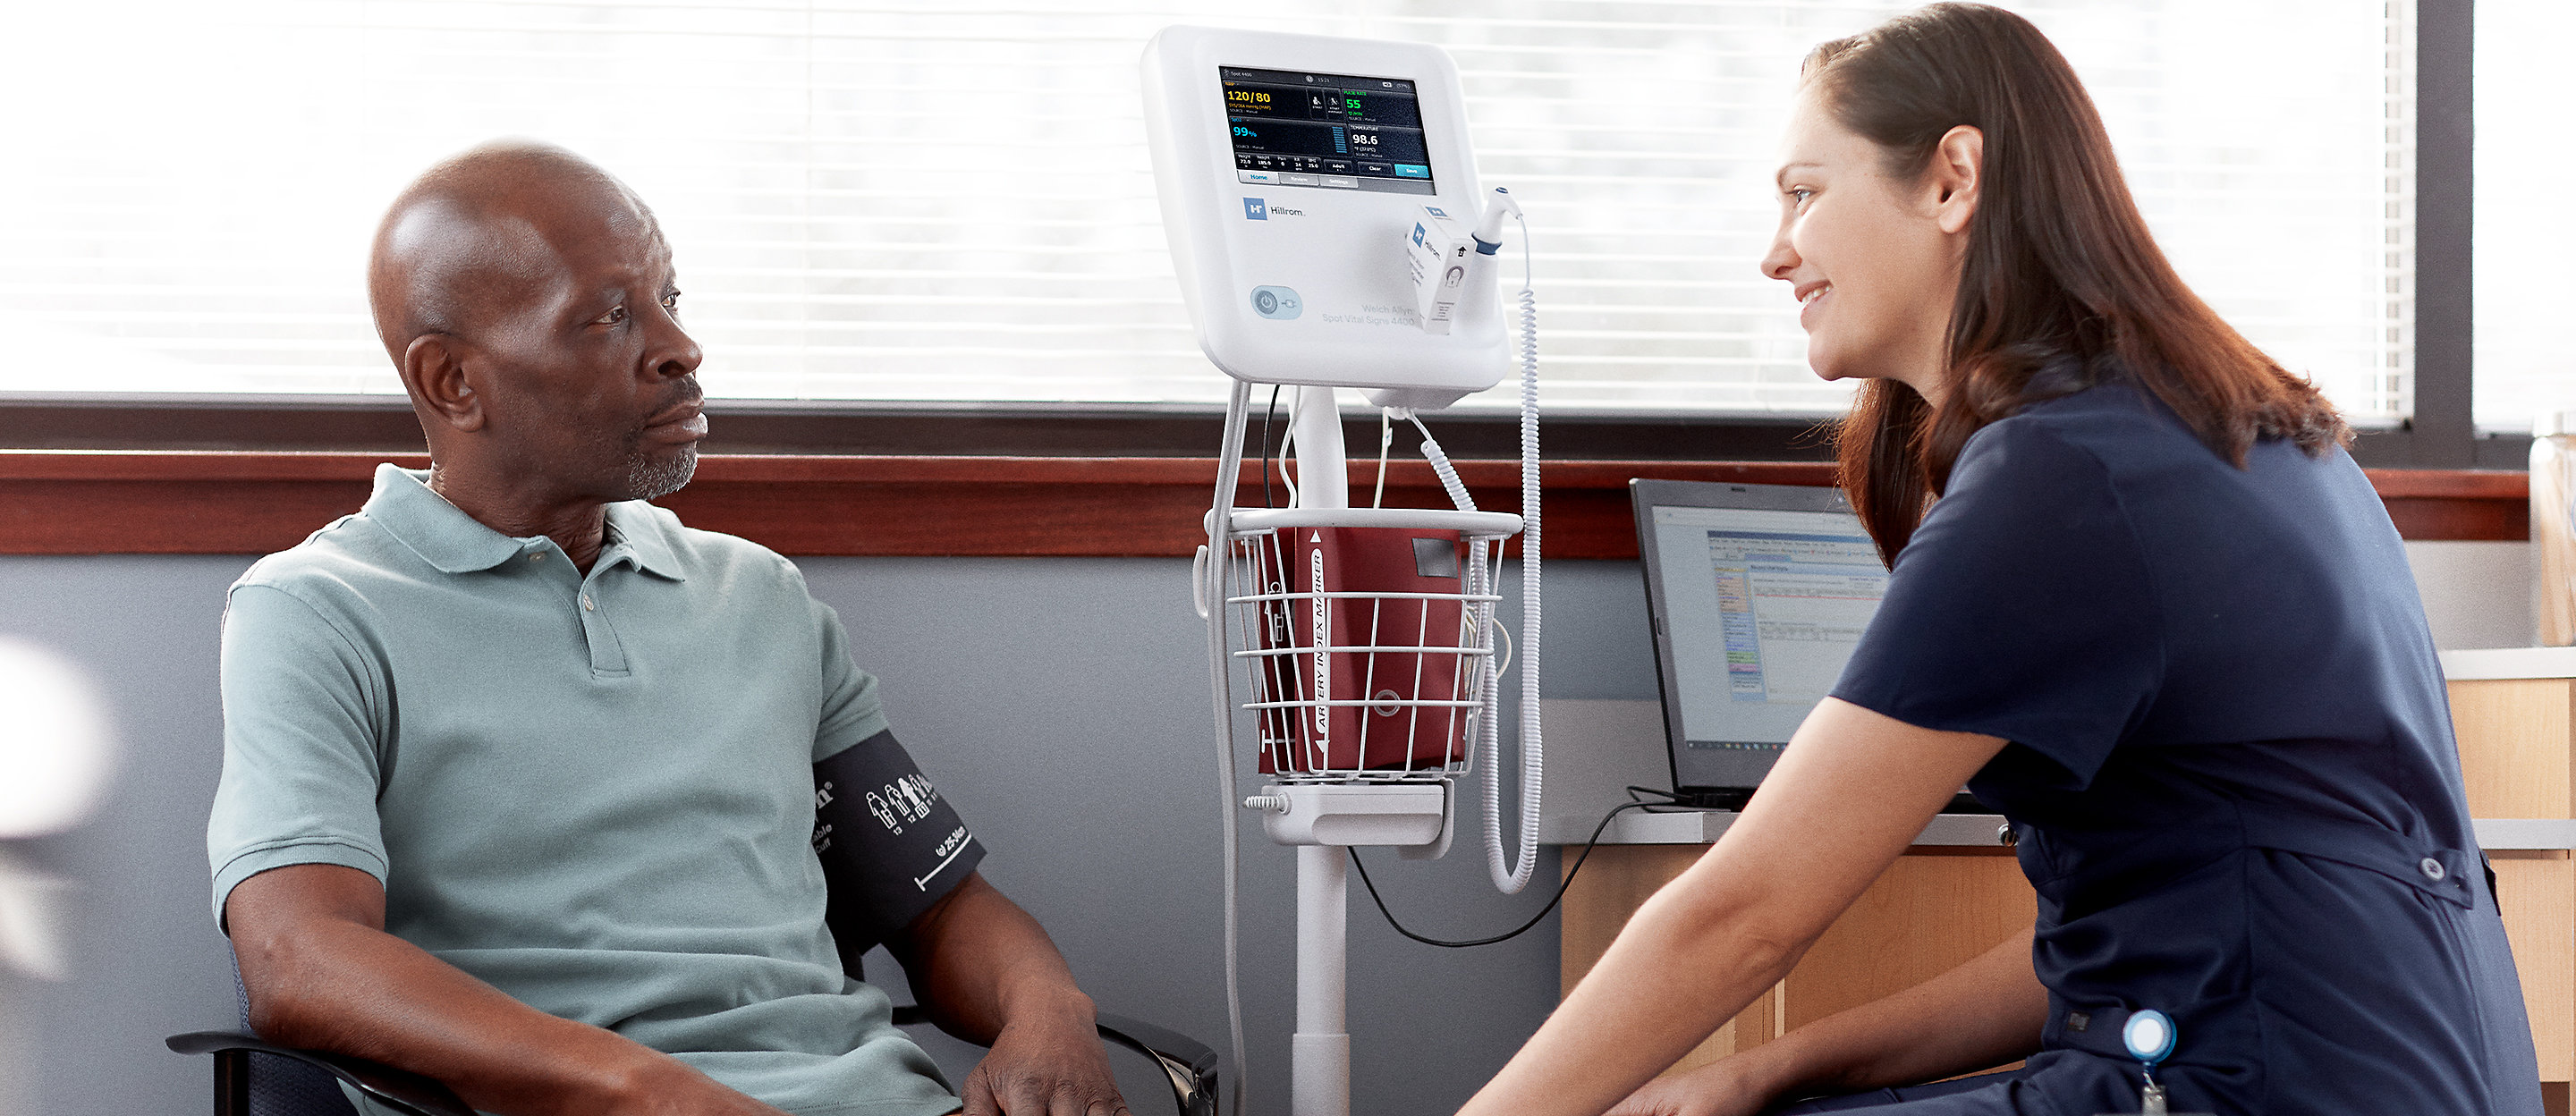 Caregiver rests hand on the knee of a patient with the Welch Allyn Spot Vital Signs 4400 Device in-use